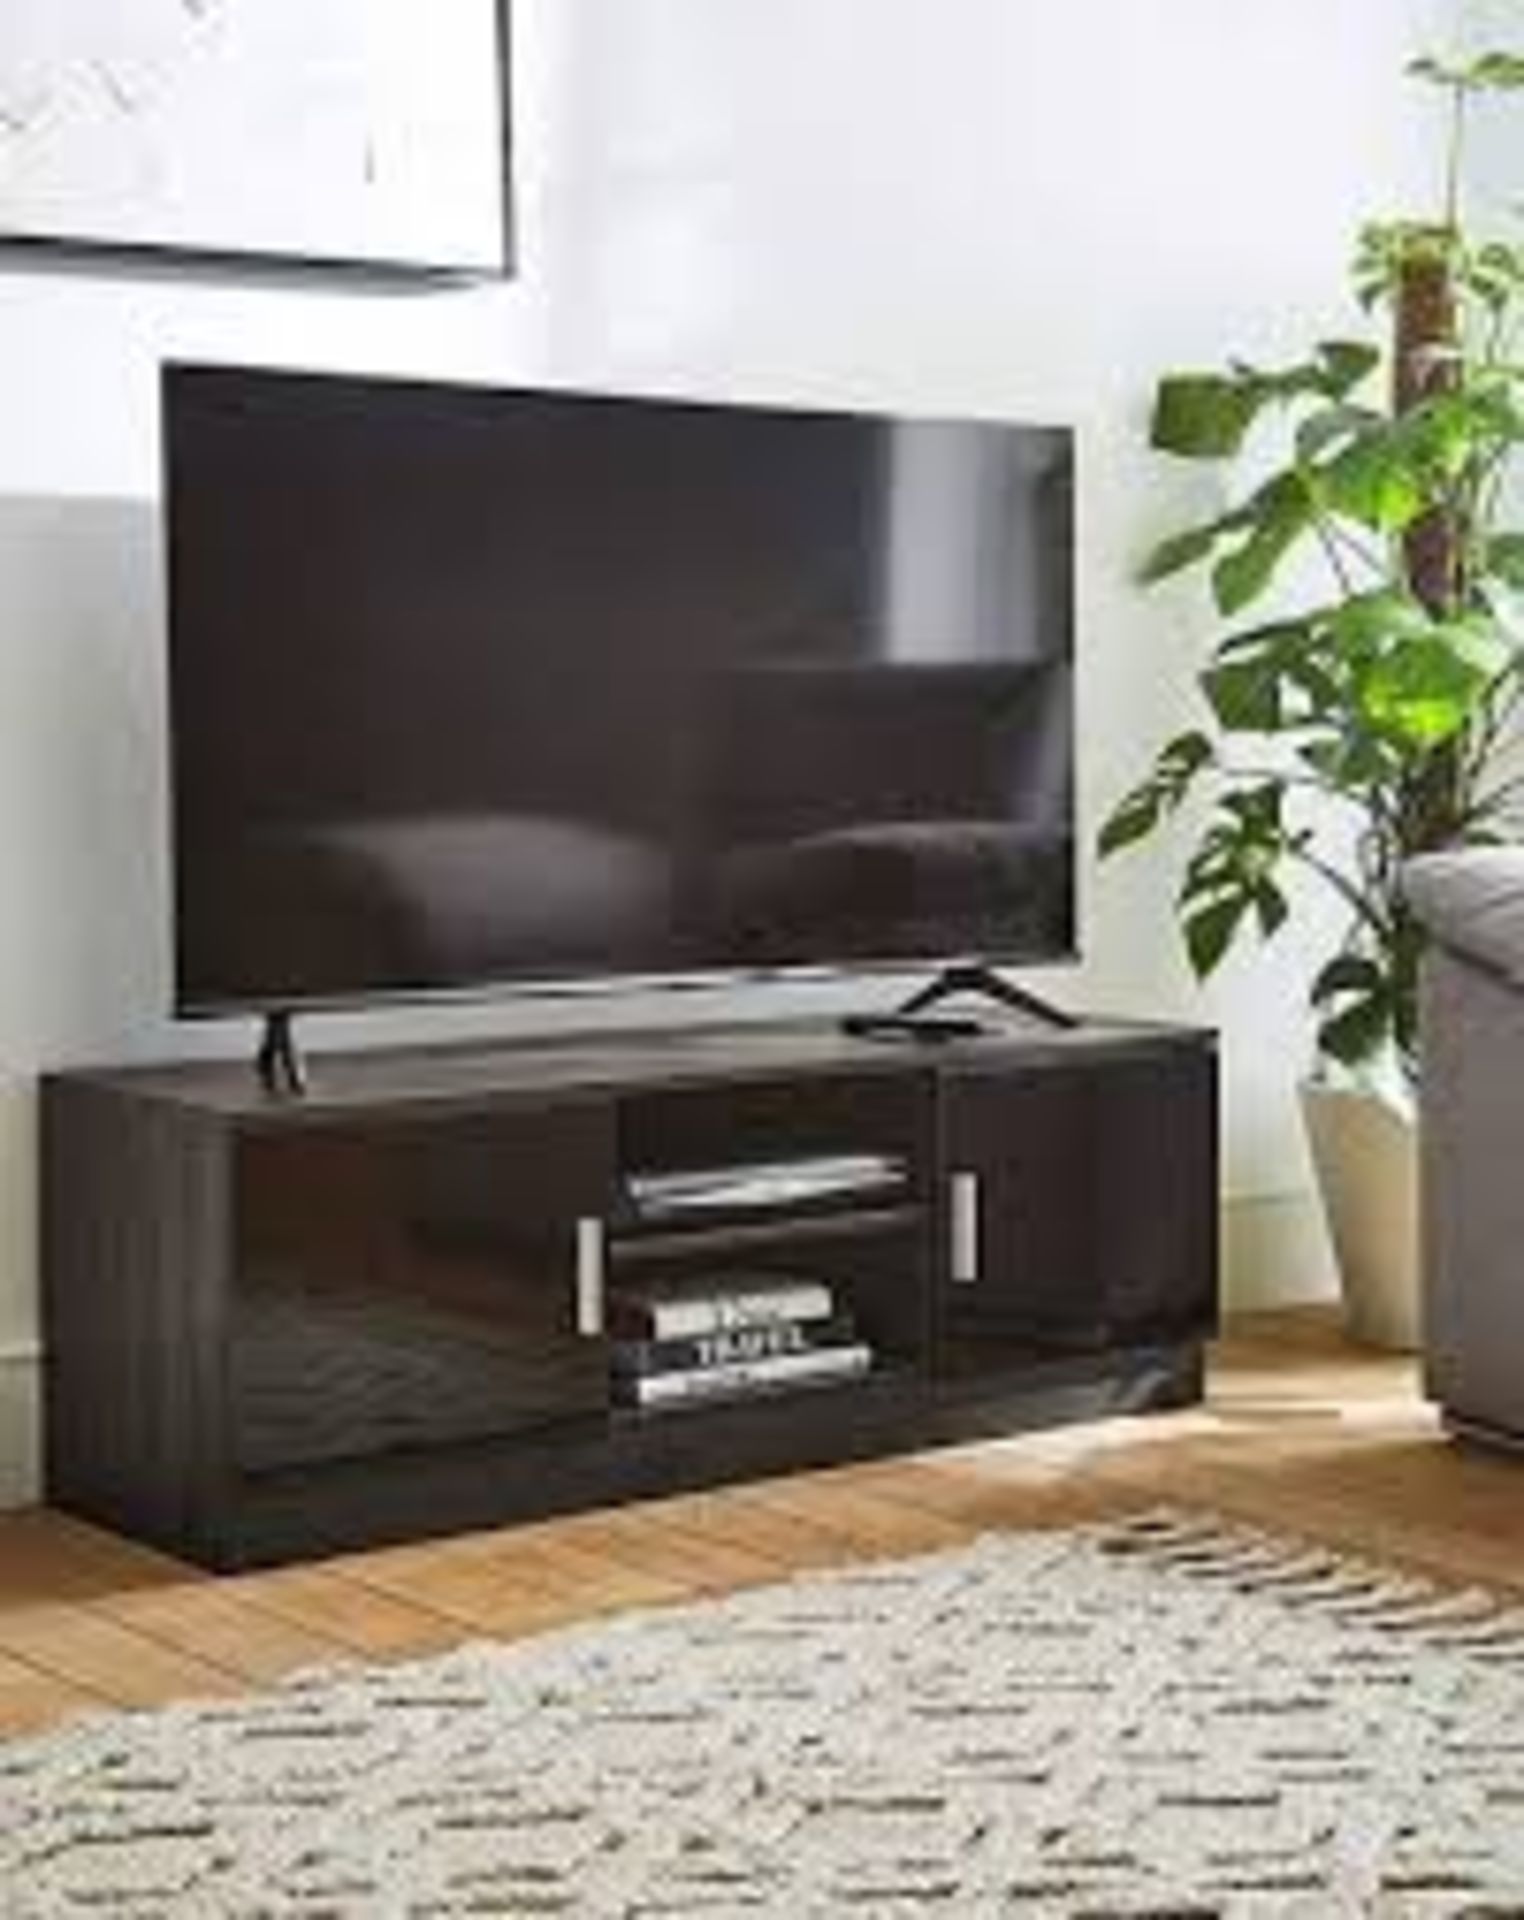 Miami TV Unit. - ER20. The Miami TV Unit is a black wood effect with a glossy black finish on the